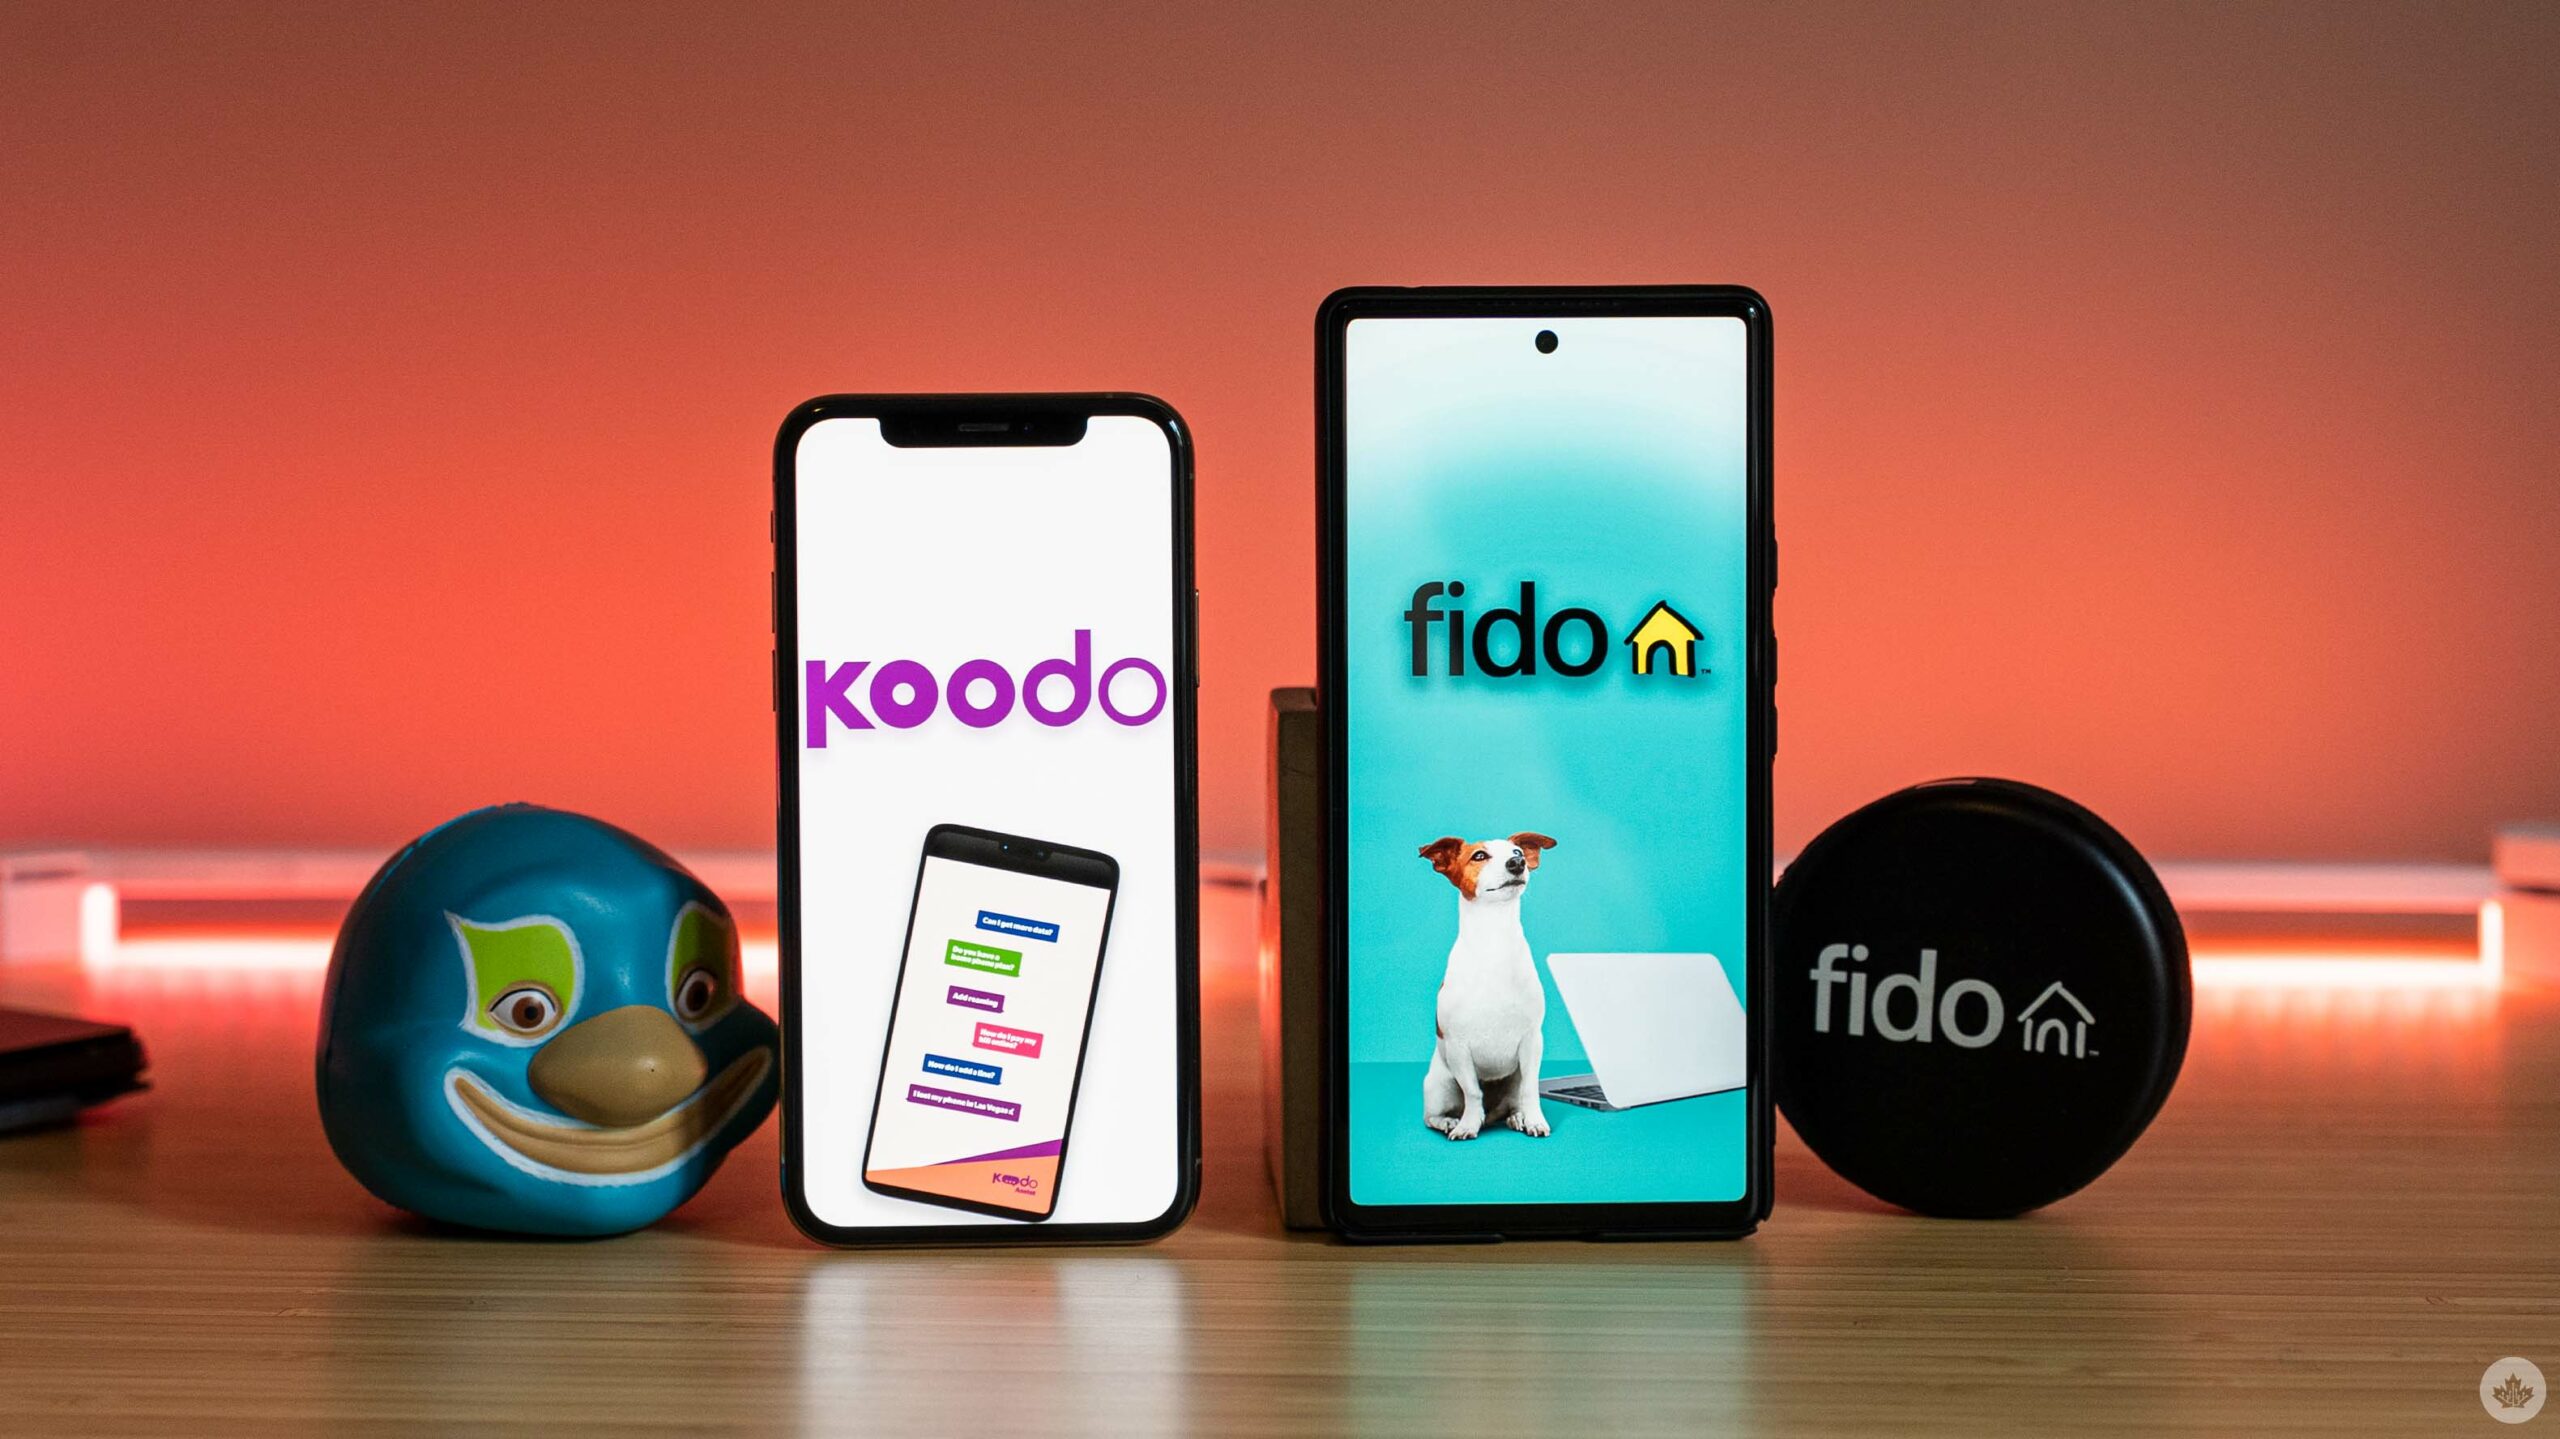 1TB iPhone 13 Pro available for $39/mo at Fido, Koodo